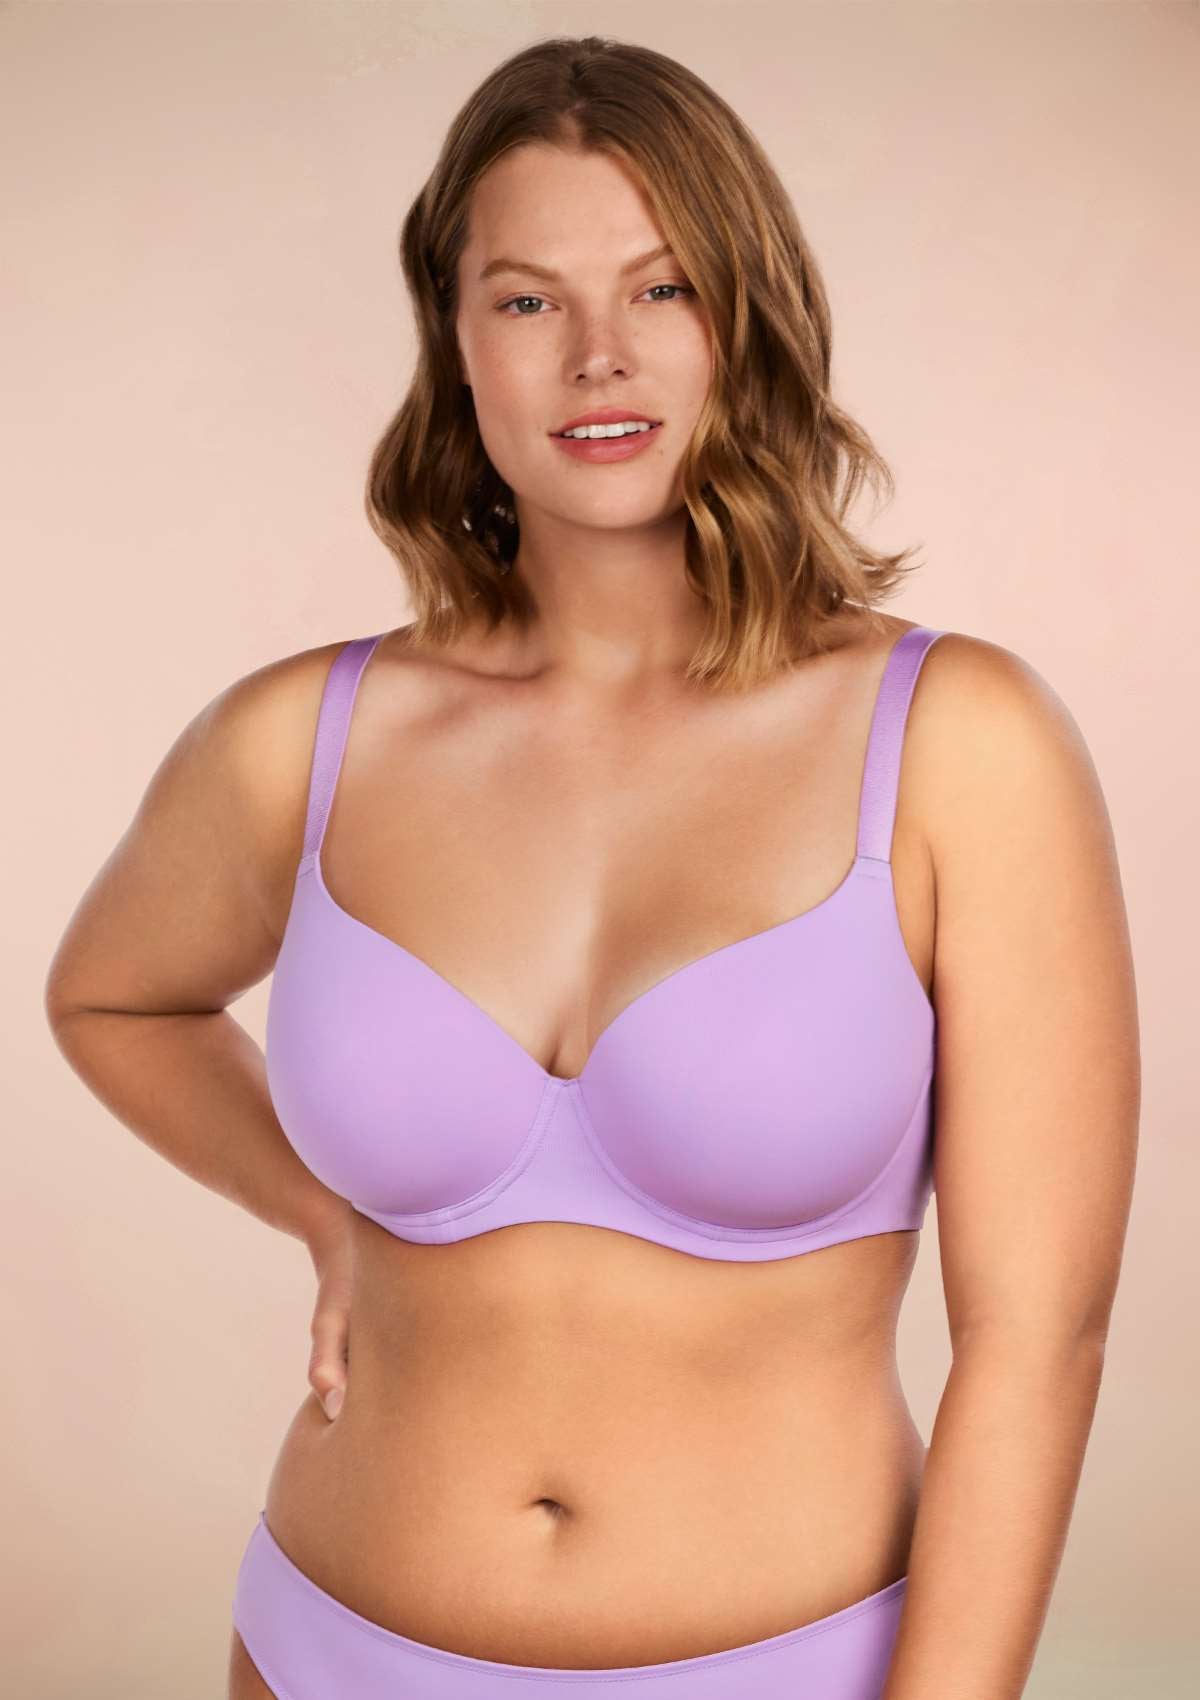 HSIA Gemma Smooth Lightly Padded T-shirt Bra For Heavy Breasts - Pink / 38 / D